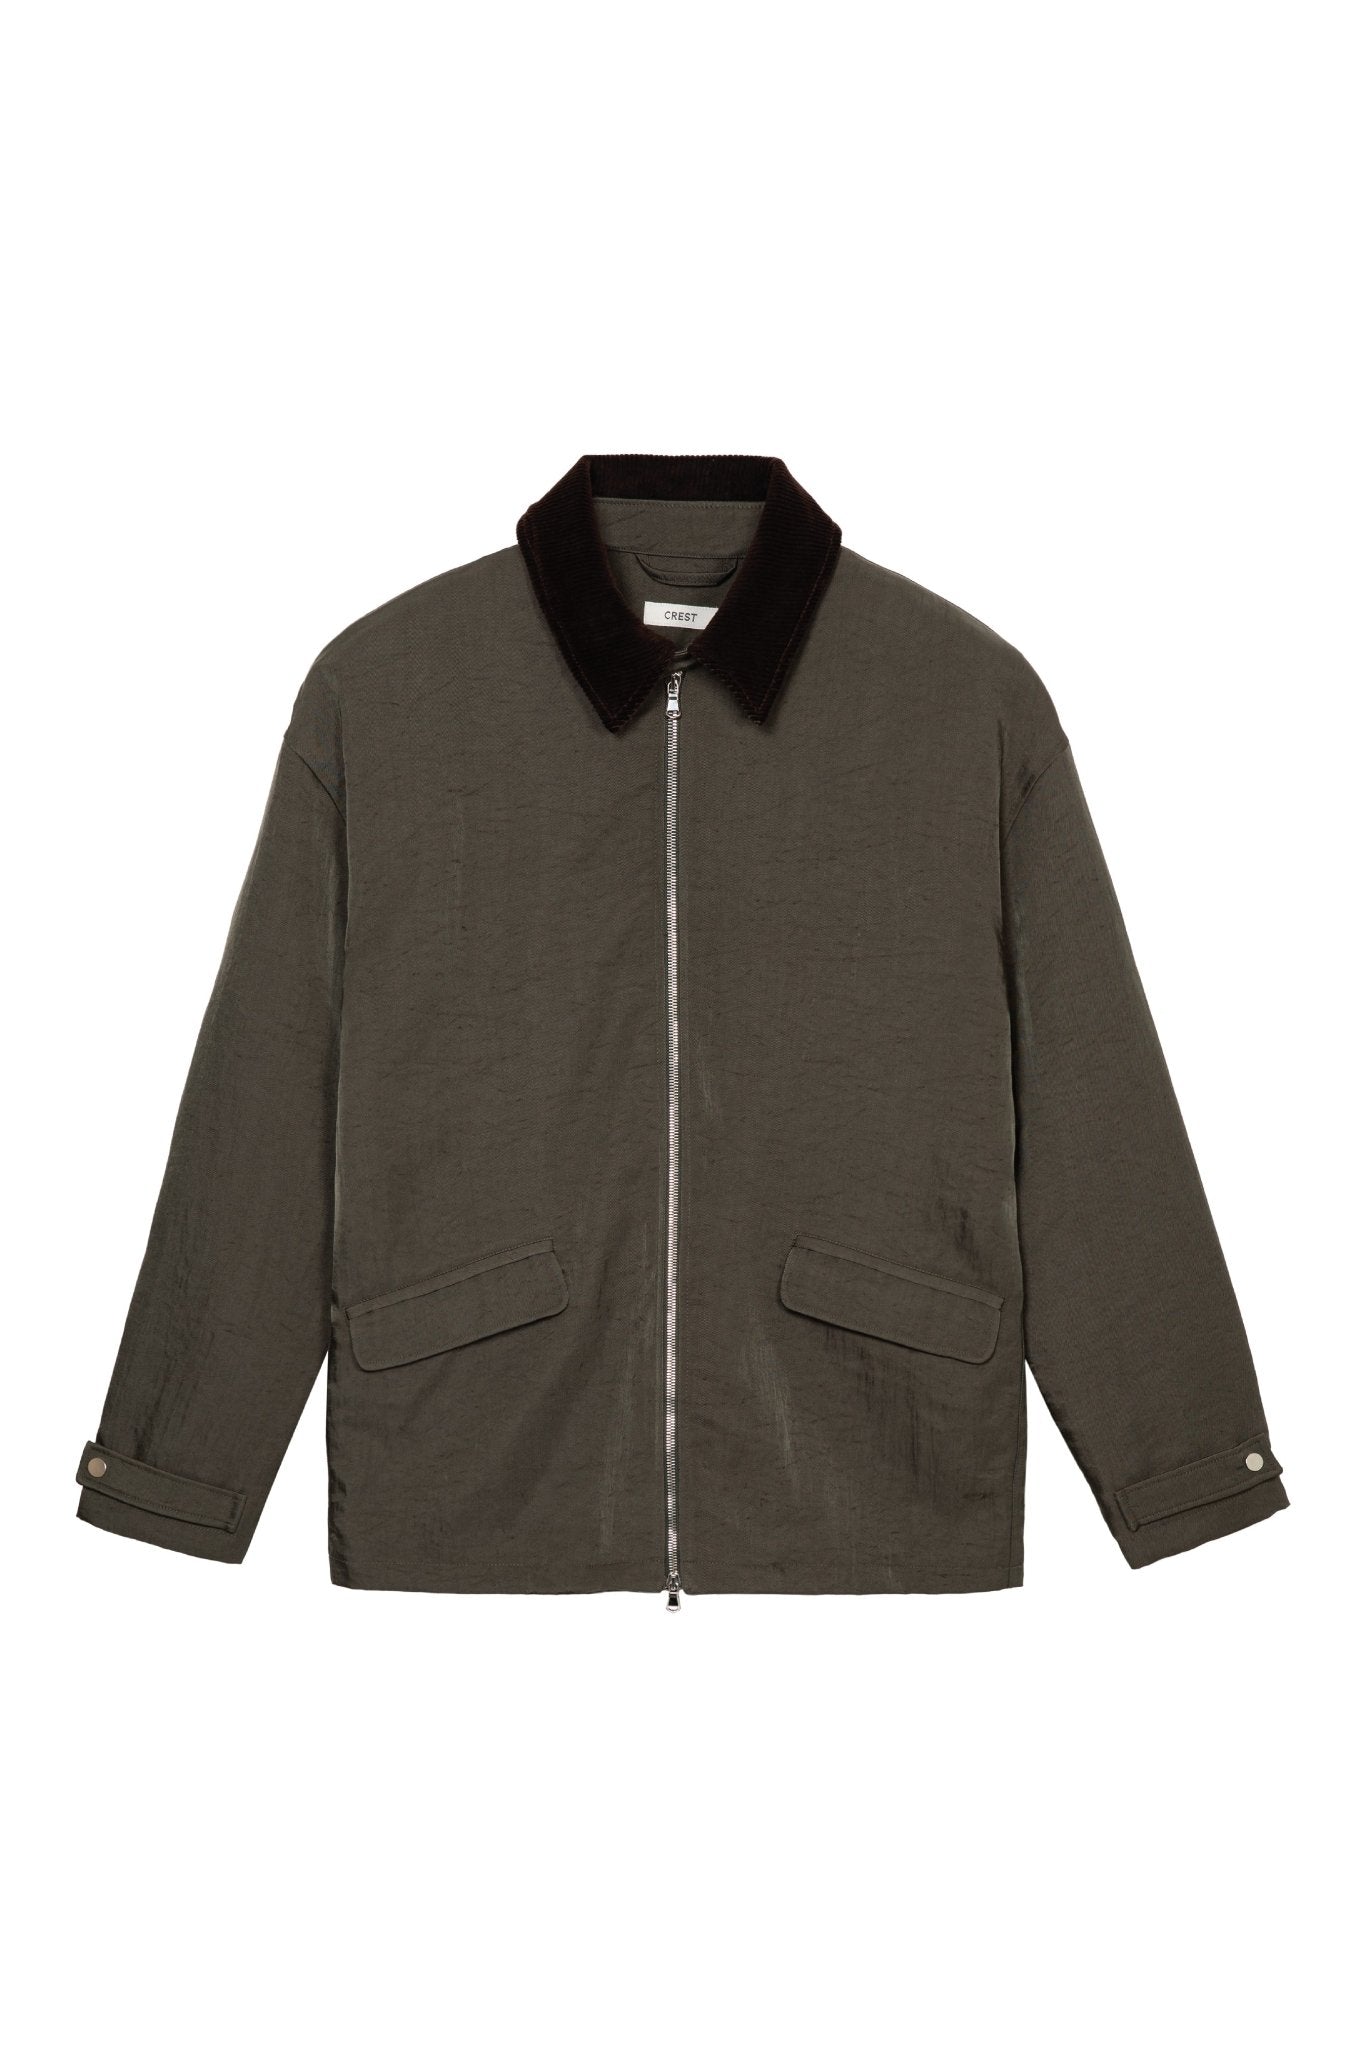 CREST - Country Flight Jacket in Ash 